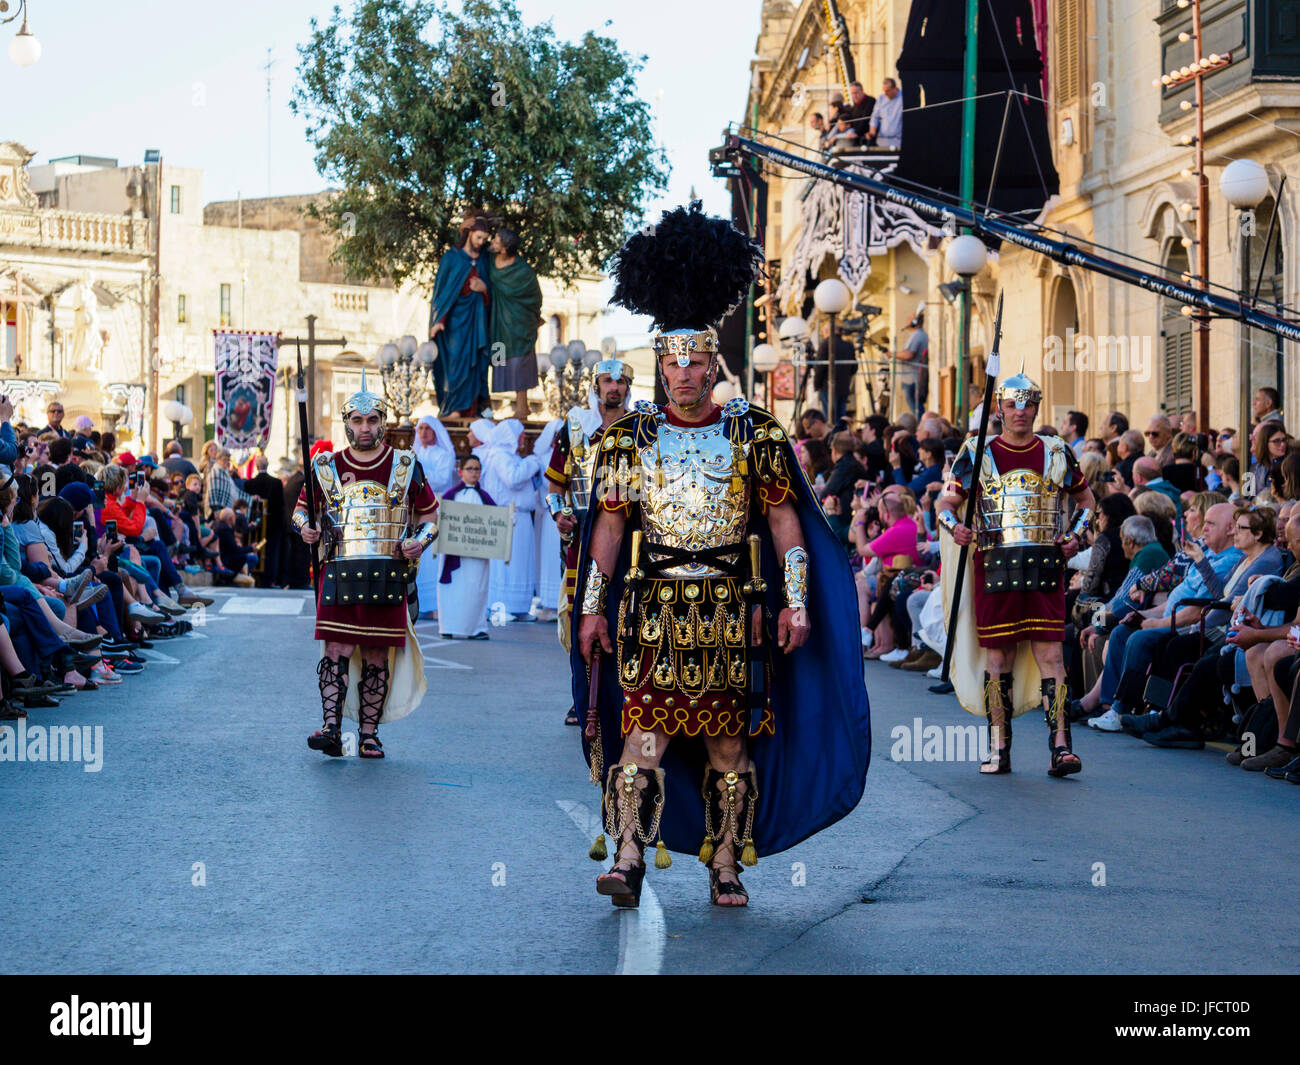 Inhabitants of Zejtun / Malta had their traditional Good Friday procession in front of their church, some of them dressed like Roman legionaries Stock Photo